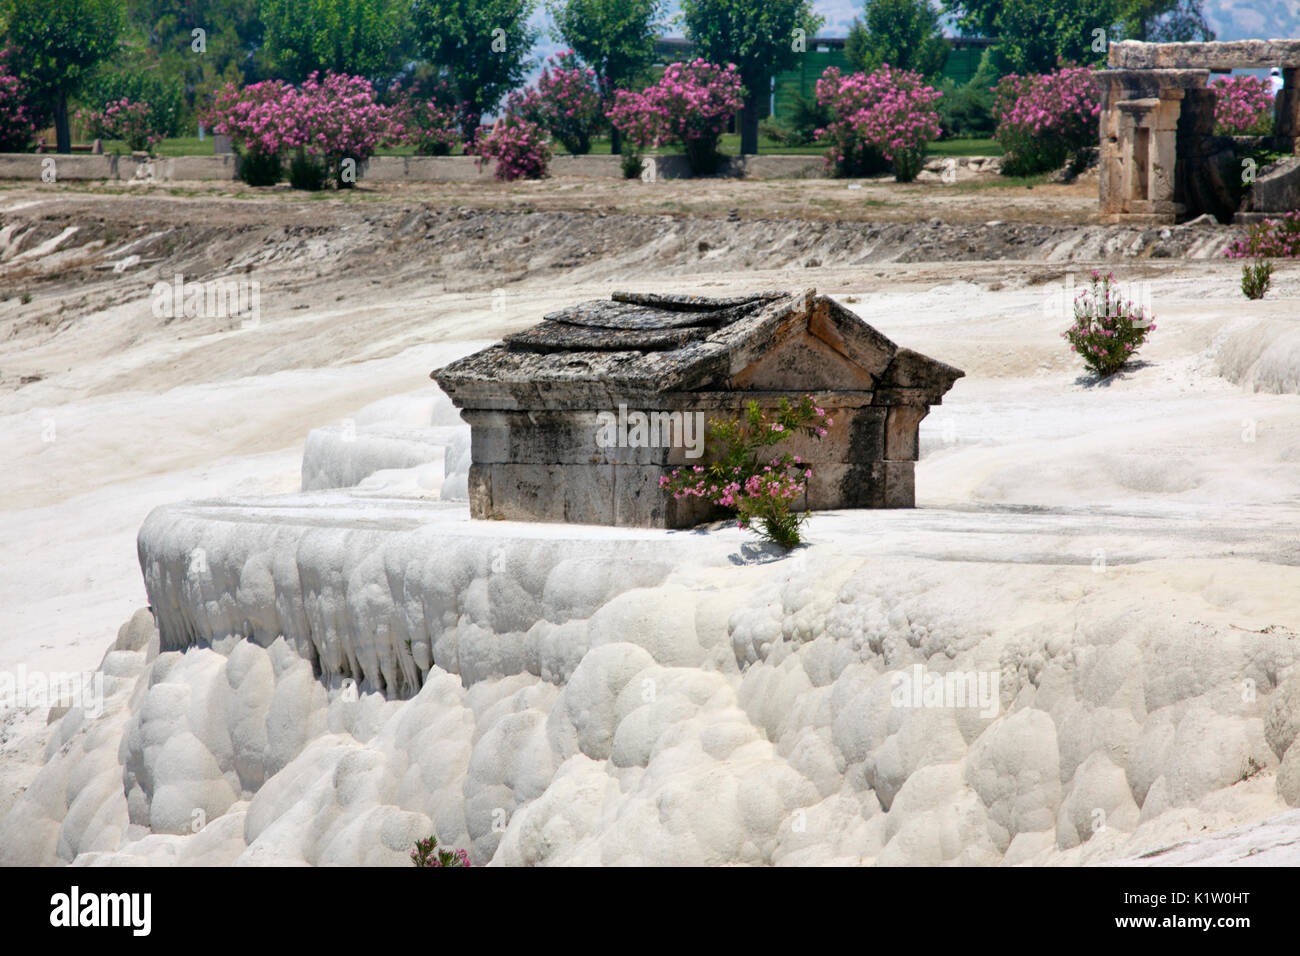 Image of part of the ruins of Hierapolis built on top of the Pamukkale formations. Stock Photo